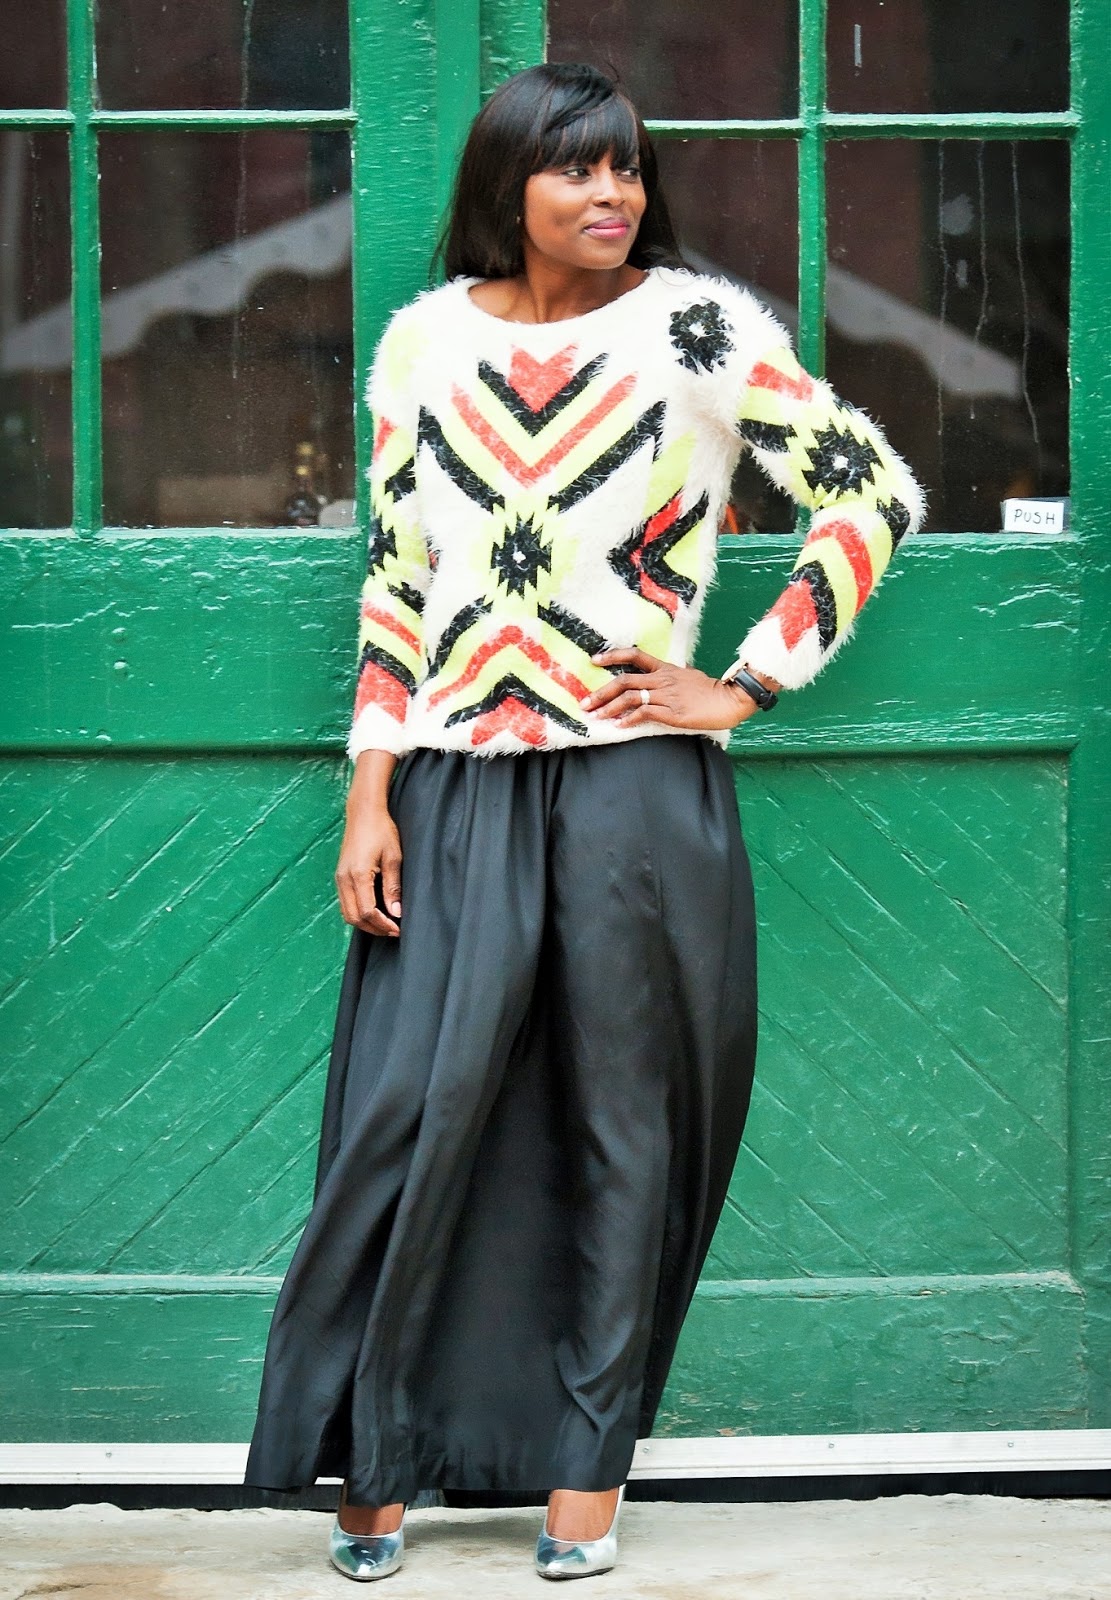 WINTER CHILLS AND HOLIDAY CHEERS // PRINTED SWEATER & MAXI SKIRT